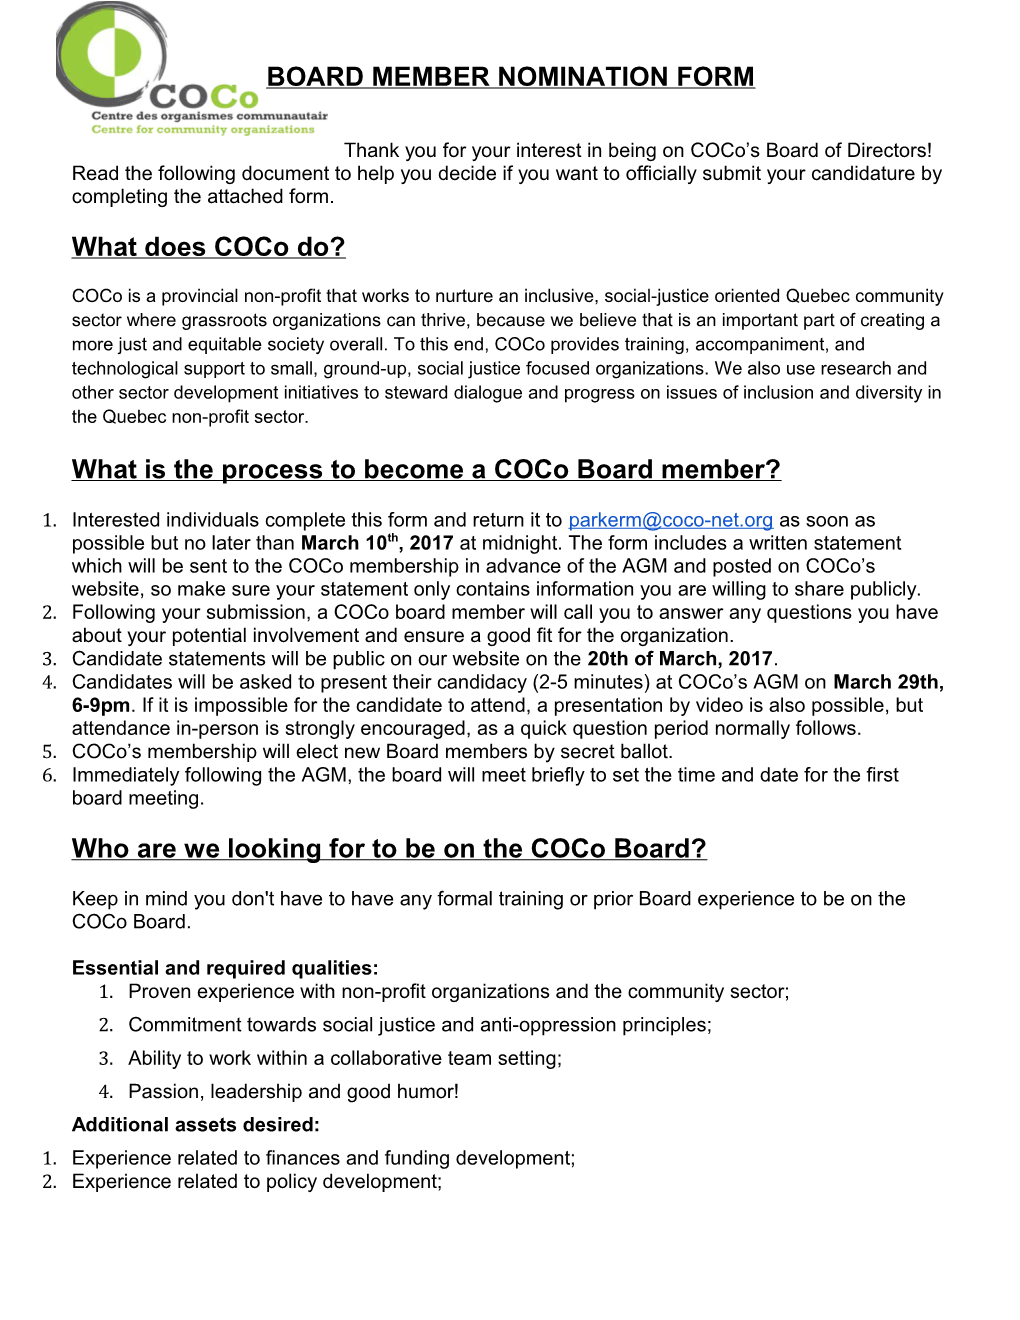 What Is the Process to Become a Coco Board Member?